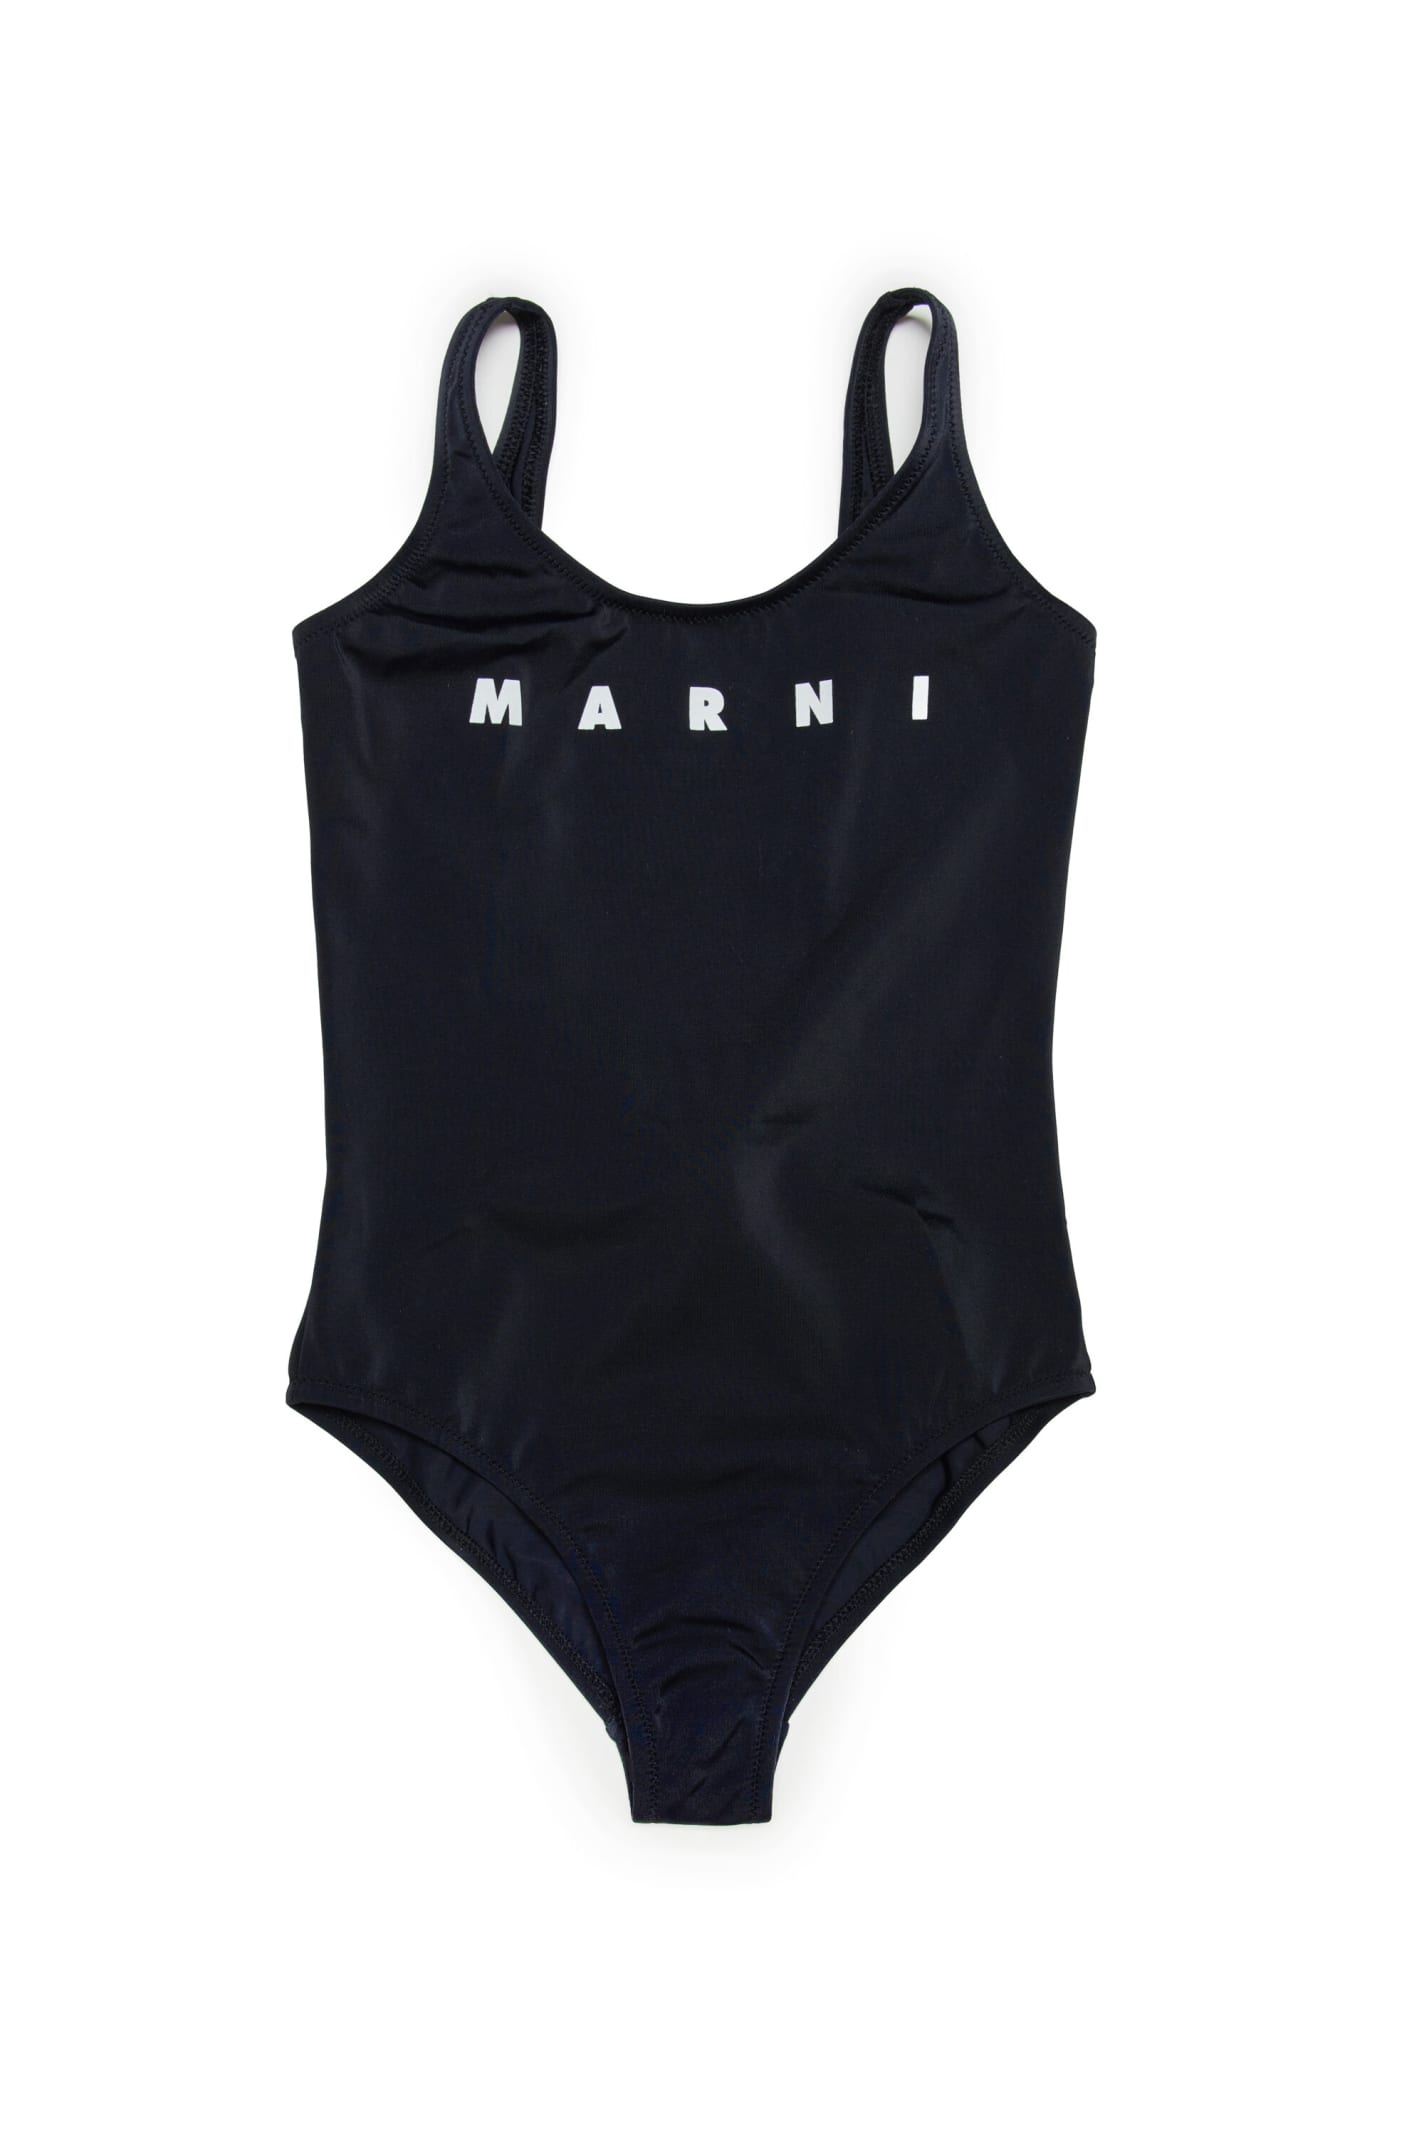 MARNI MM9F SWIMSUIT MARNI BLACK ONE-PIECE SWIMMING COSTUME IN LYCRA WITH LOGO